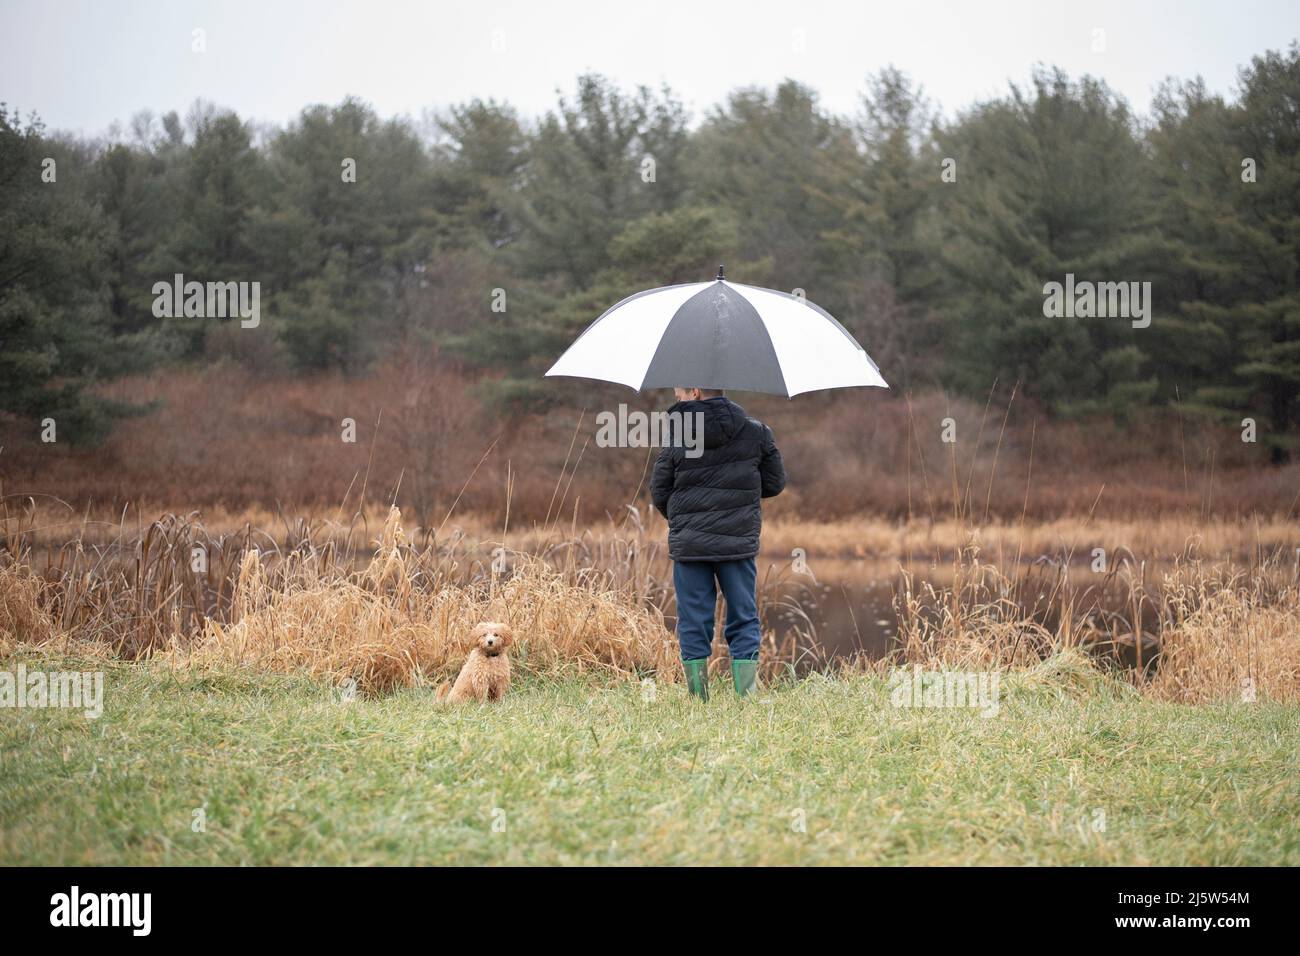 A boy holding an umbrella looking at his puppy in front of a pon Stock Photo